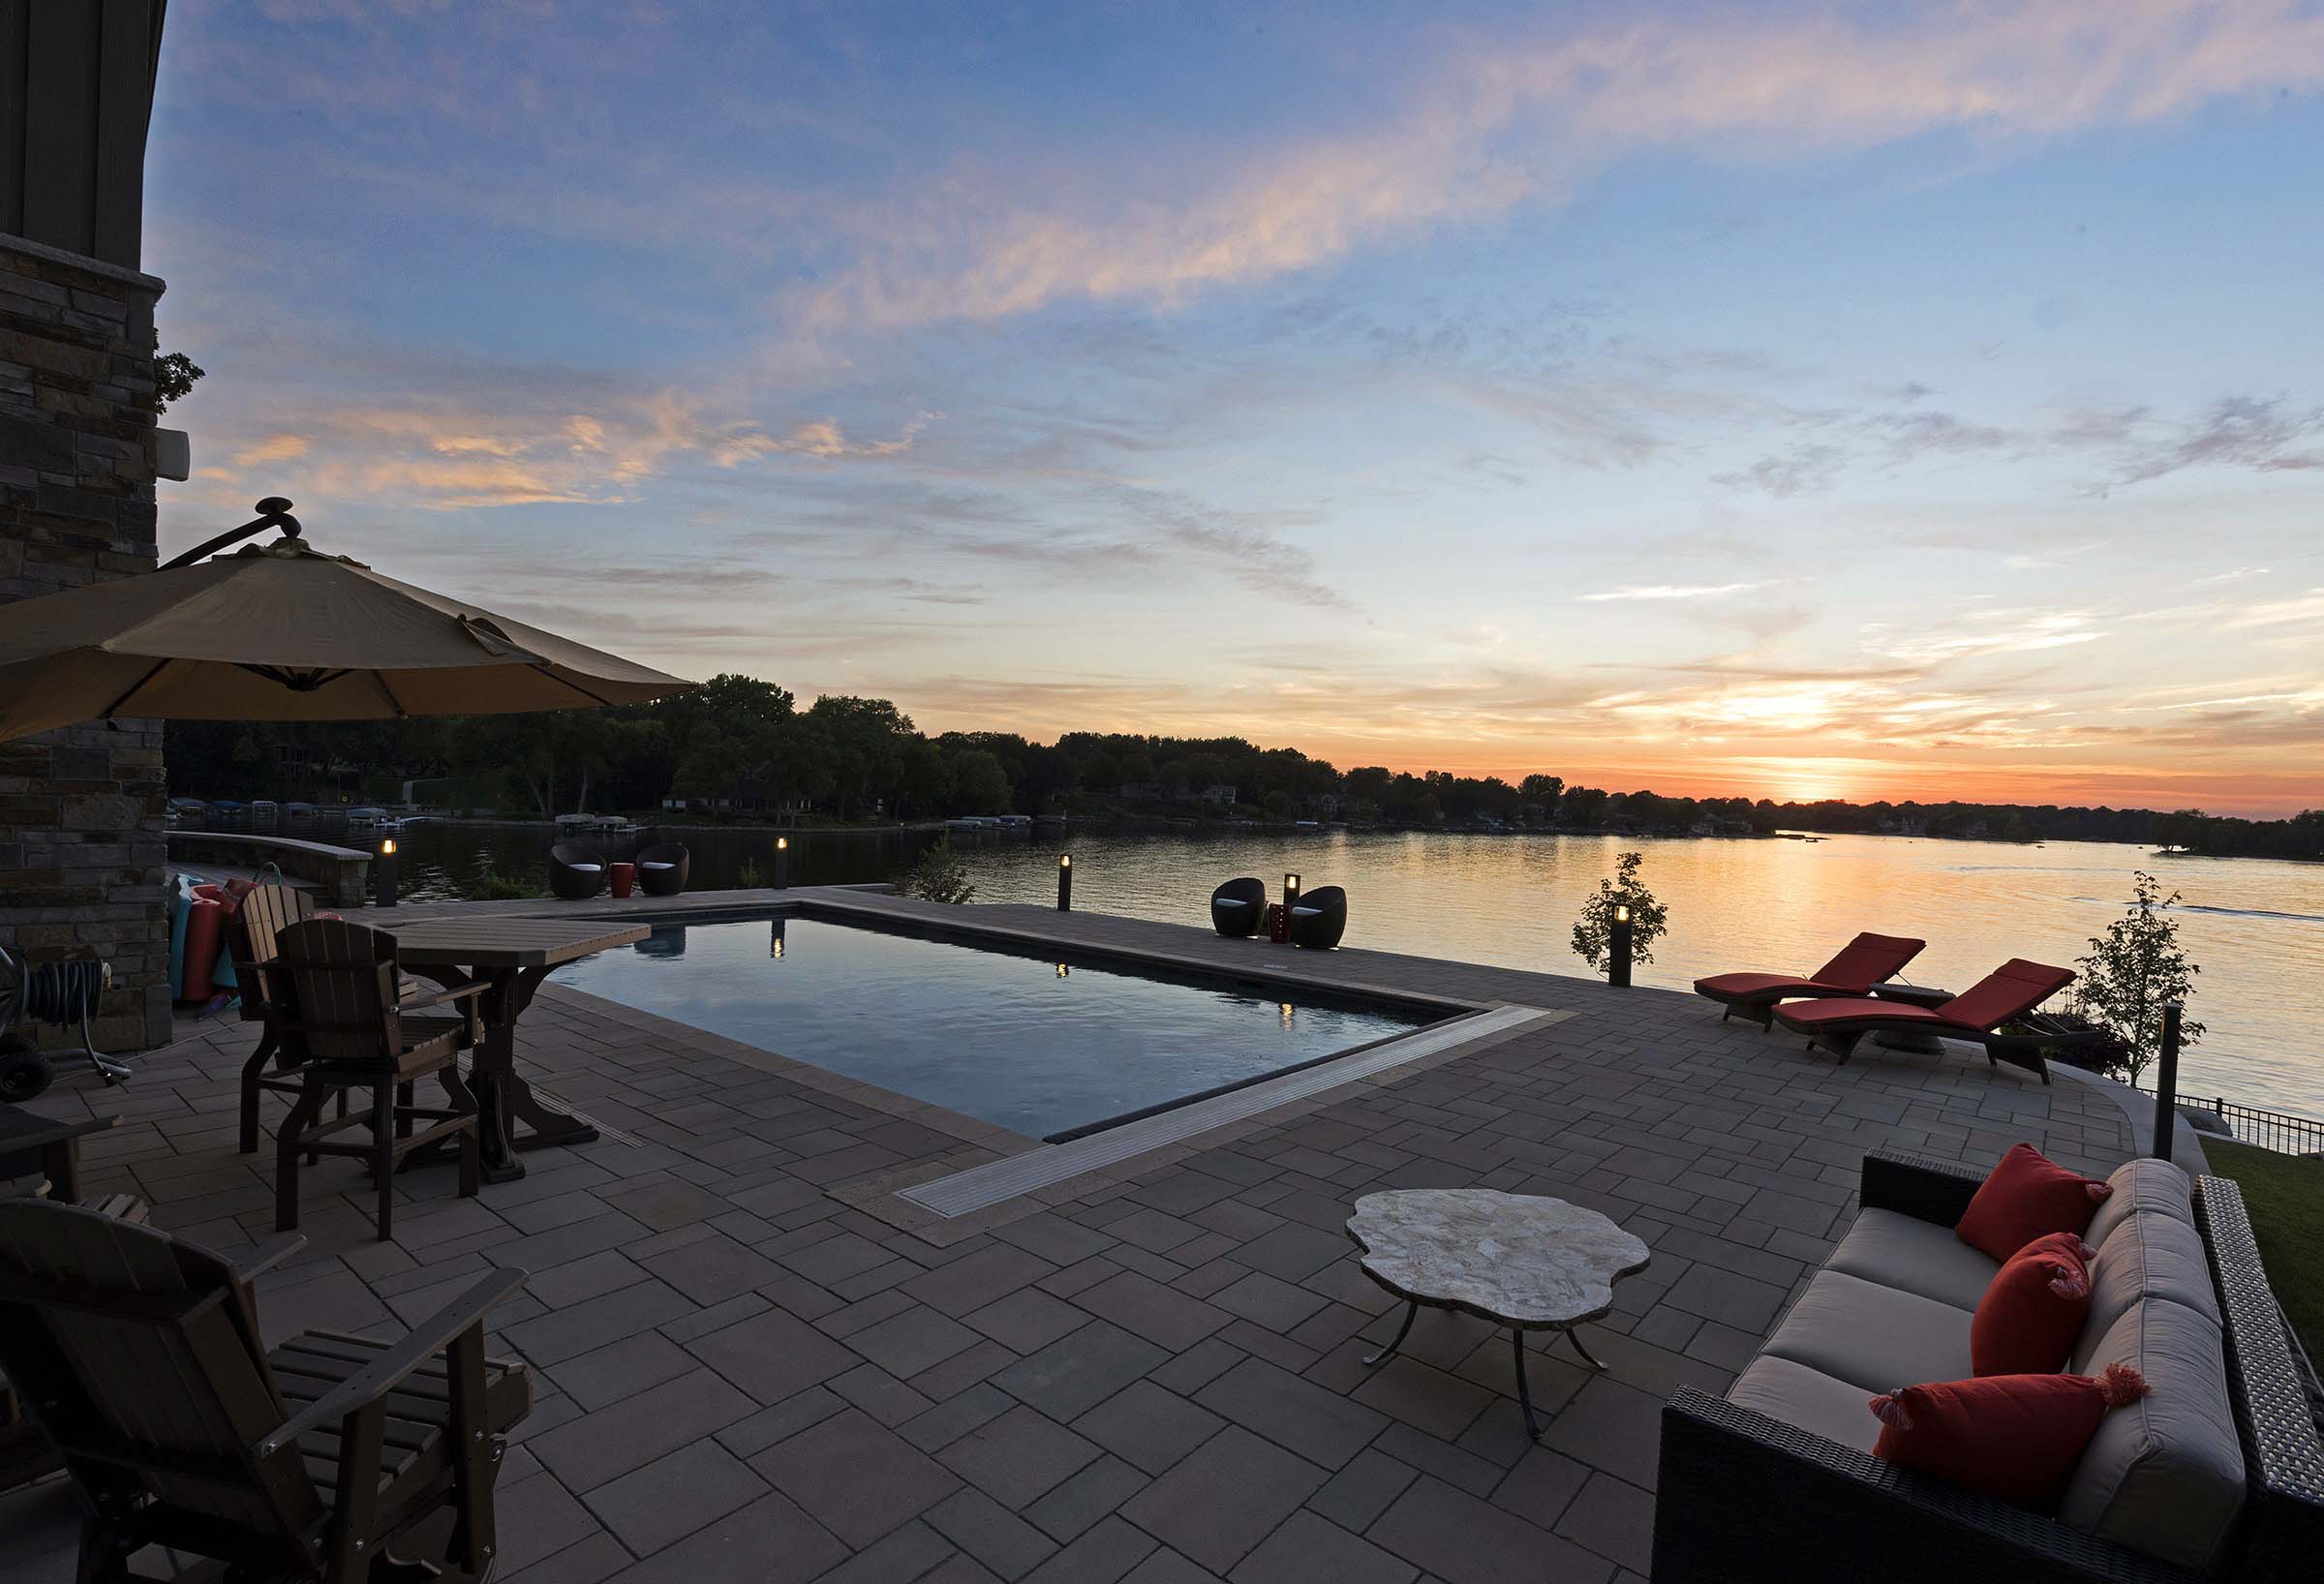 Home exterior design ideas: A stunning patio featuring a fire pit and offering a picturesque view of the lake.